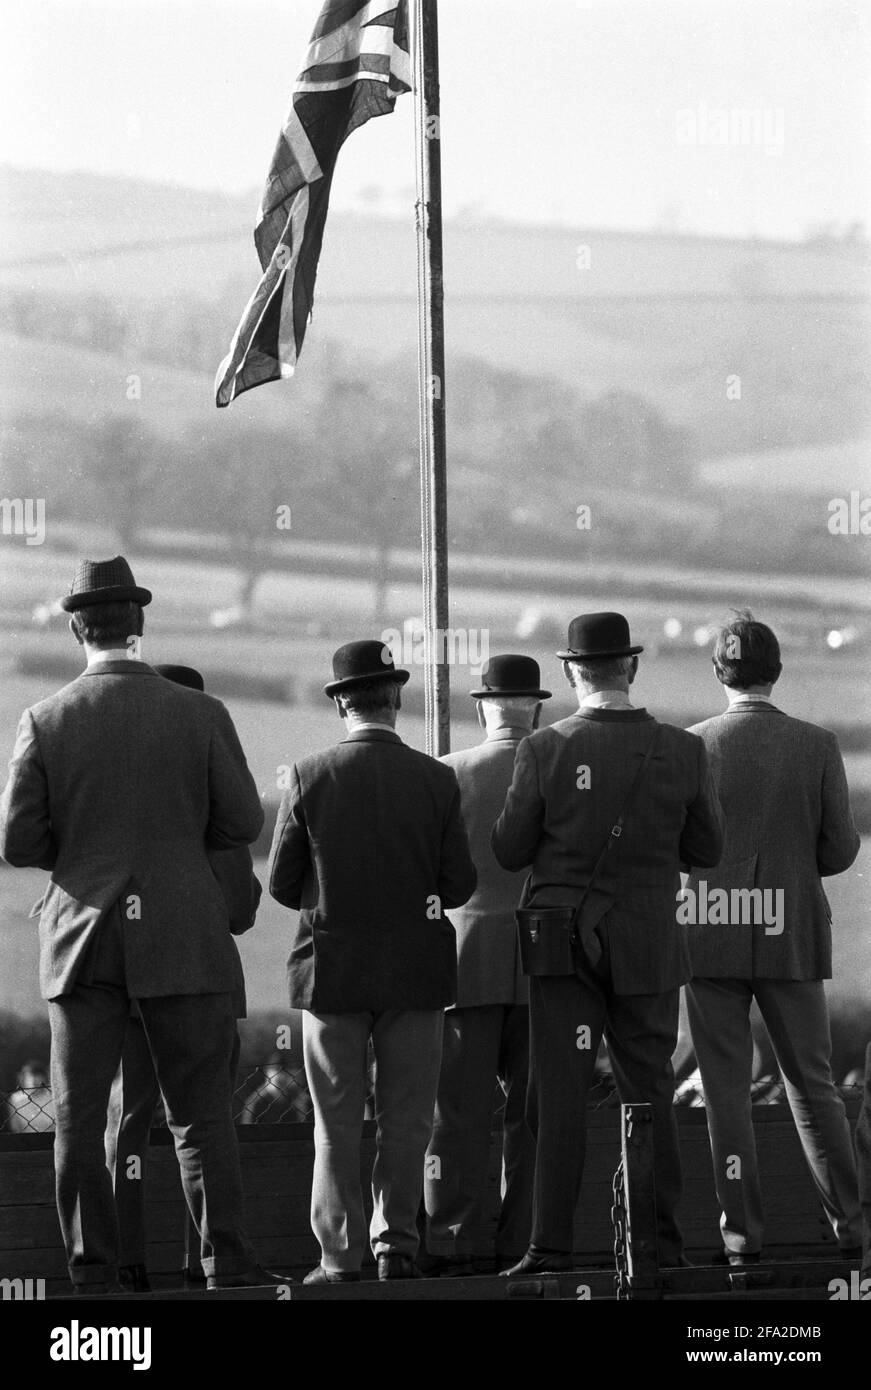 UK, England, Devonshire, Buckfastleigh, 1972. Point-to-Point races were held at  Dean Court on the Dean Marshes, close to the A38 between Plymouth and Exeter. Three stewards wearing black bowler hats in the center and other spectators watching a race under The Union Jack or Union Flag of the UK. Stock Photo